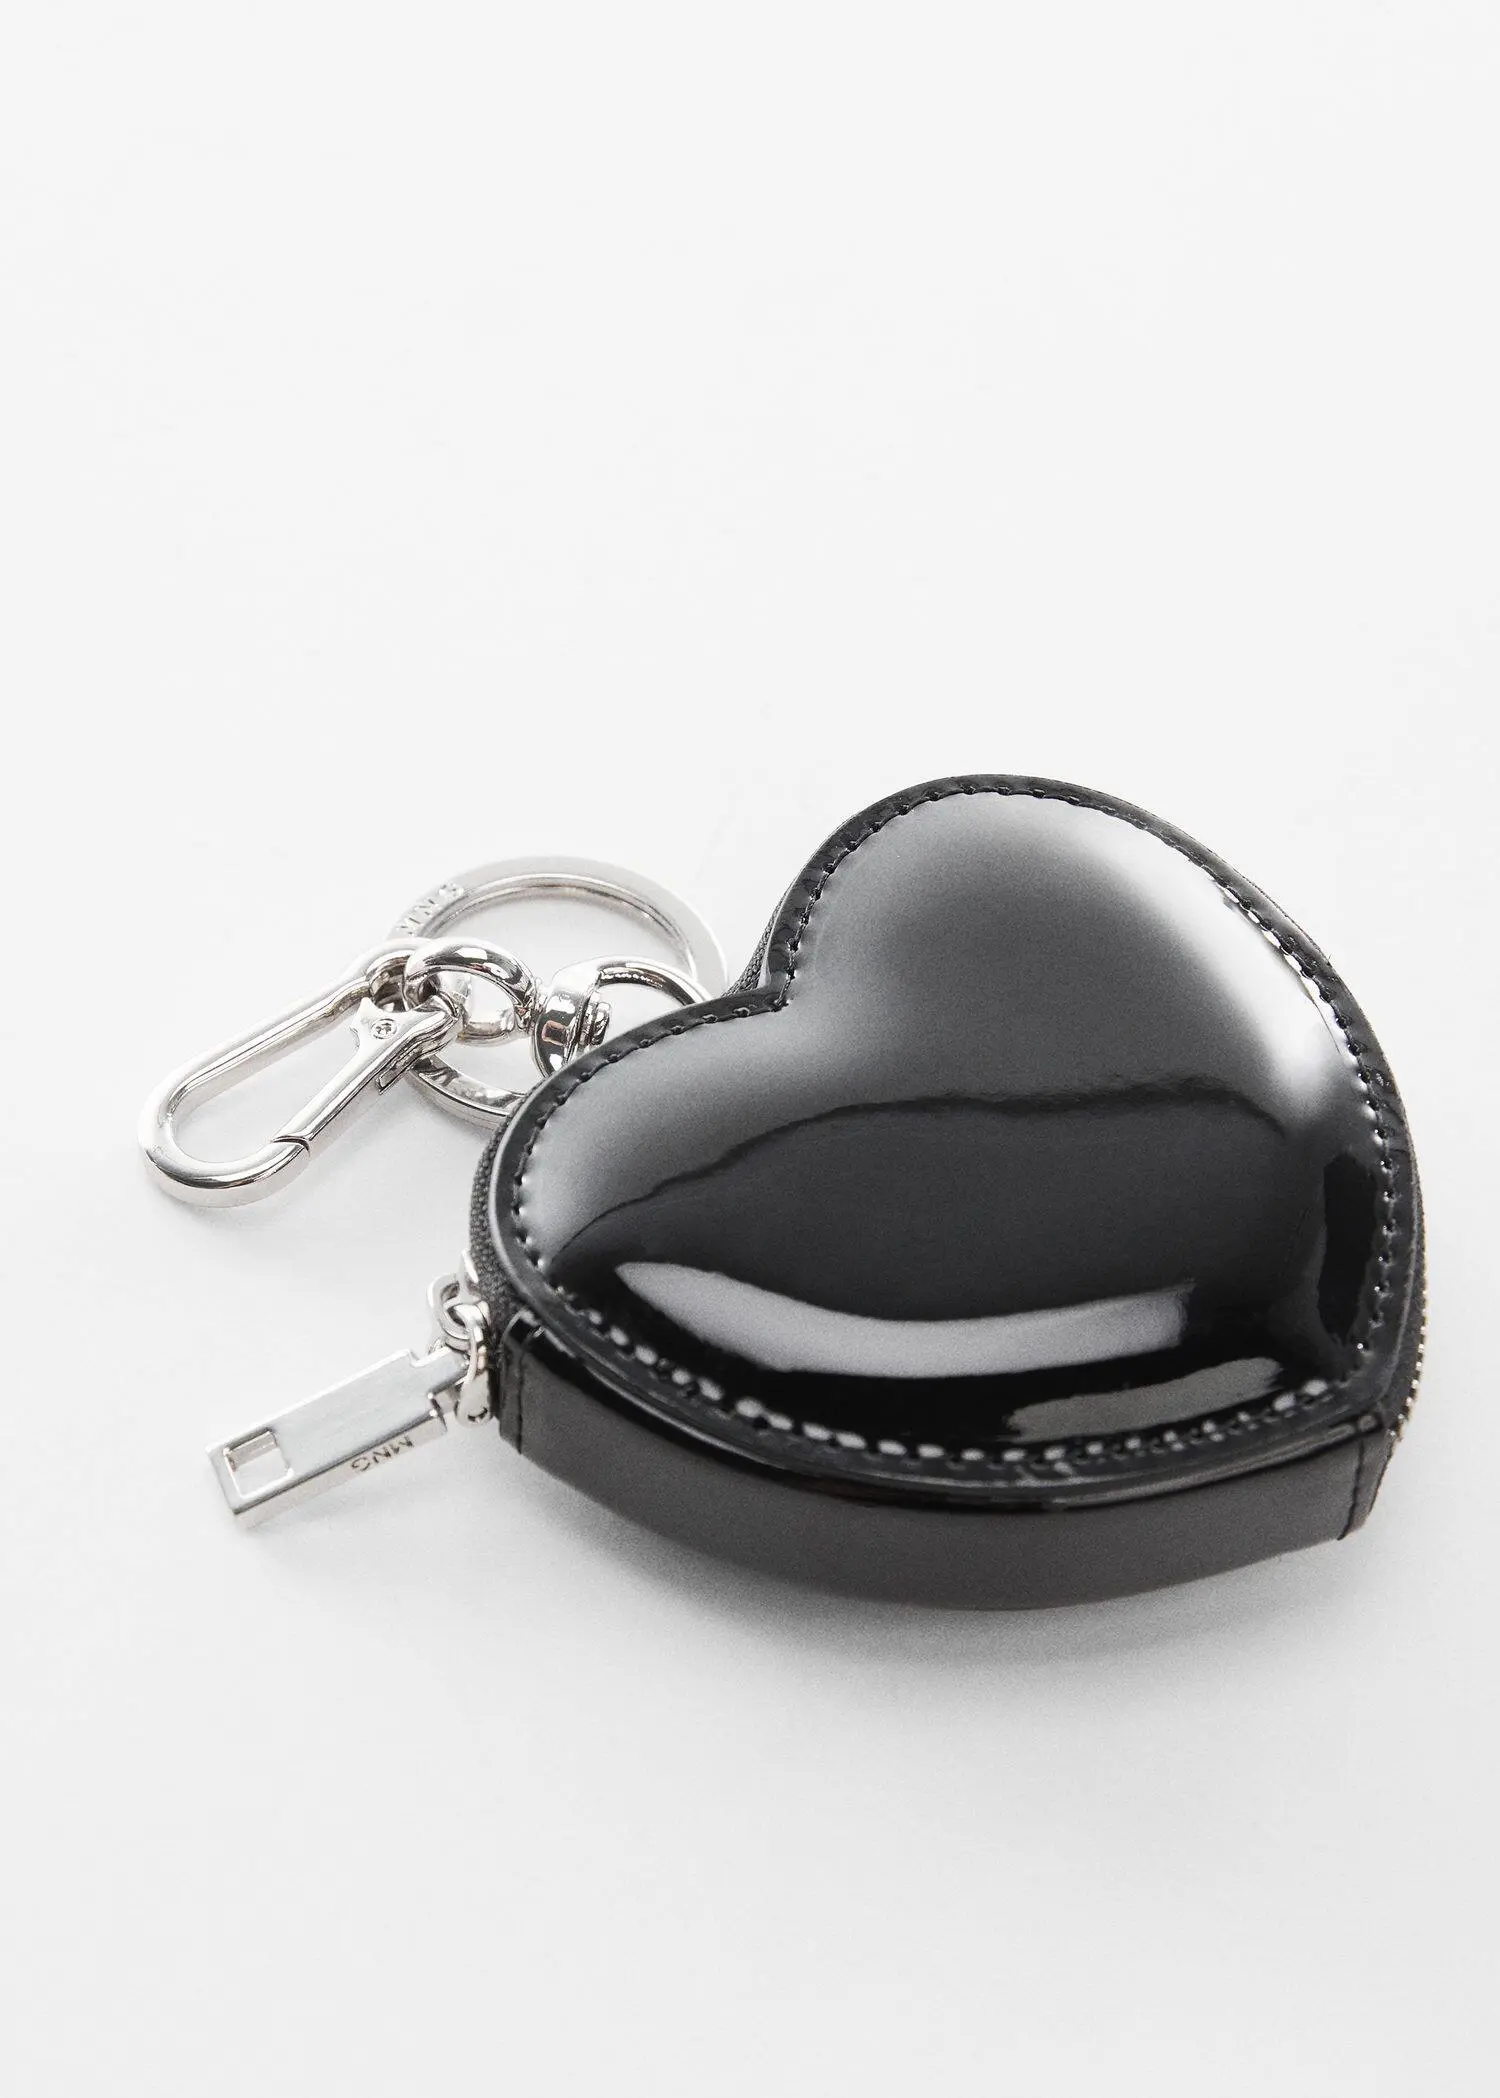 Mango Wallet with heart keychain . 2